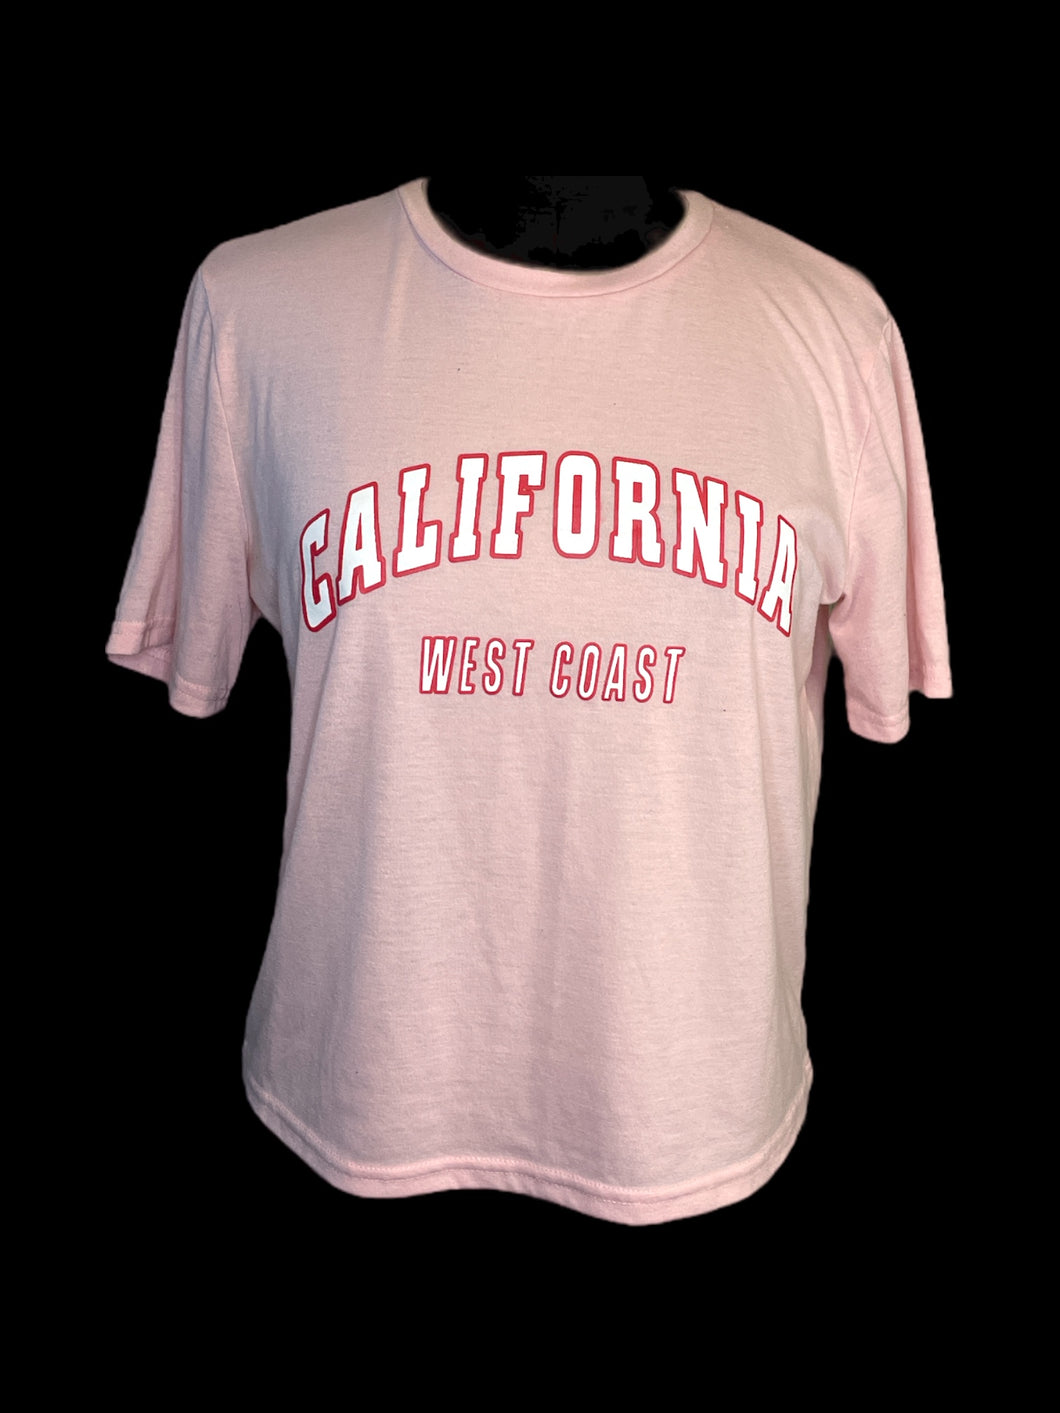 L Light pink short sleeve crew neck crop top w/ white & red collegiate lettering “California West Coast”